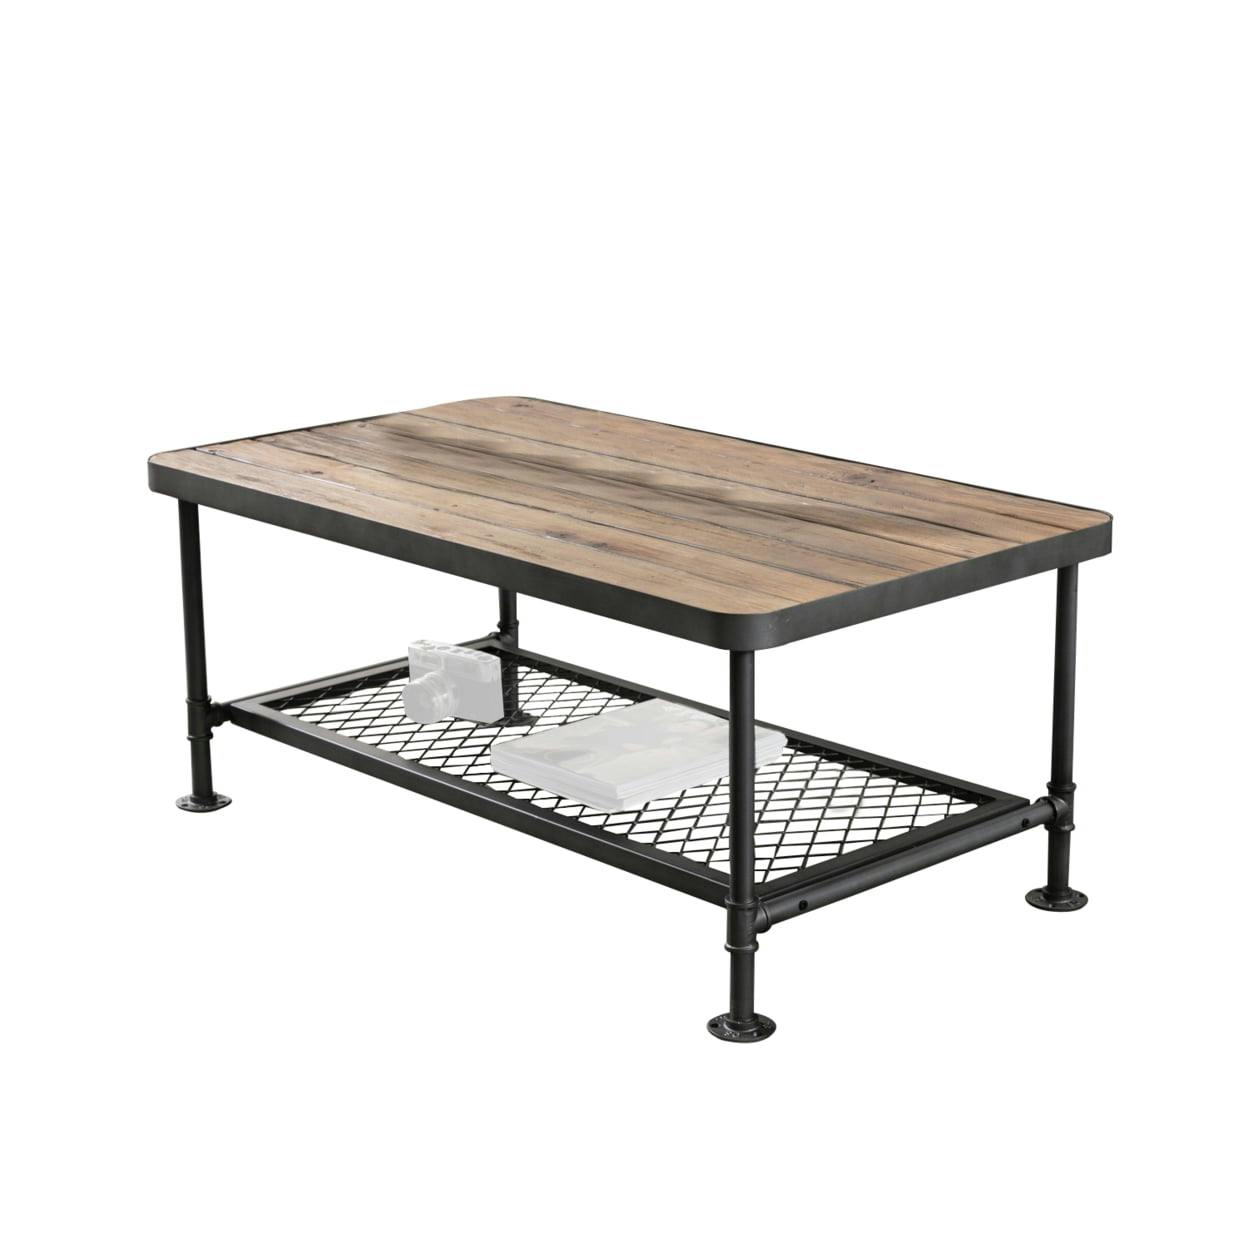 Industrial Plank-Top Coffee Table with Mesh Shelf, Brown and Gray